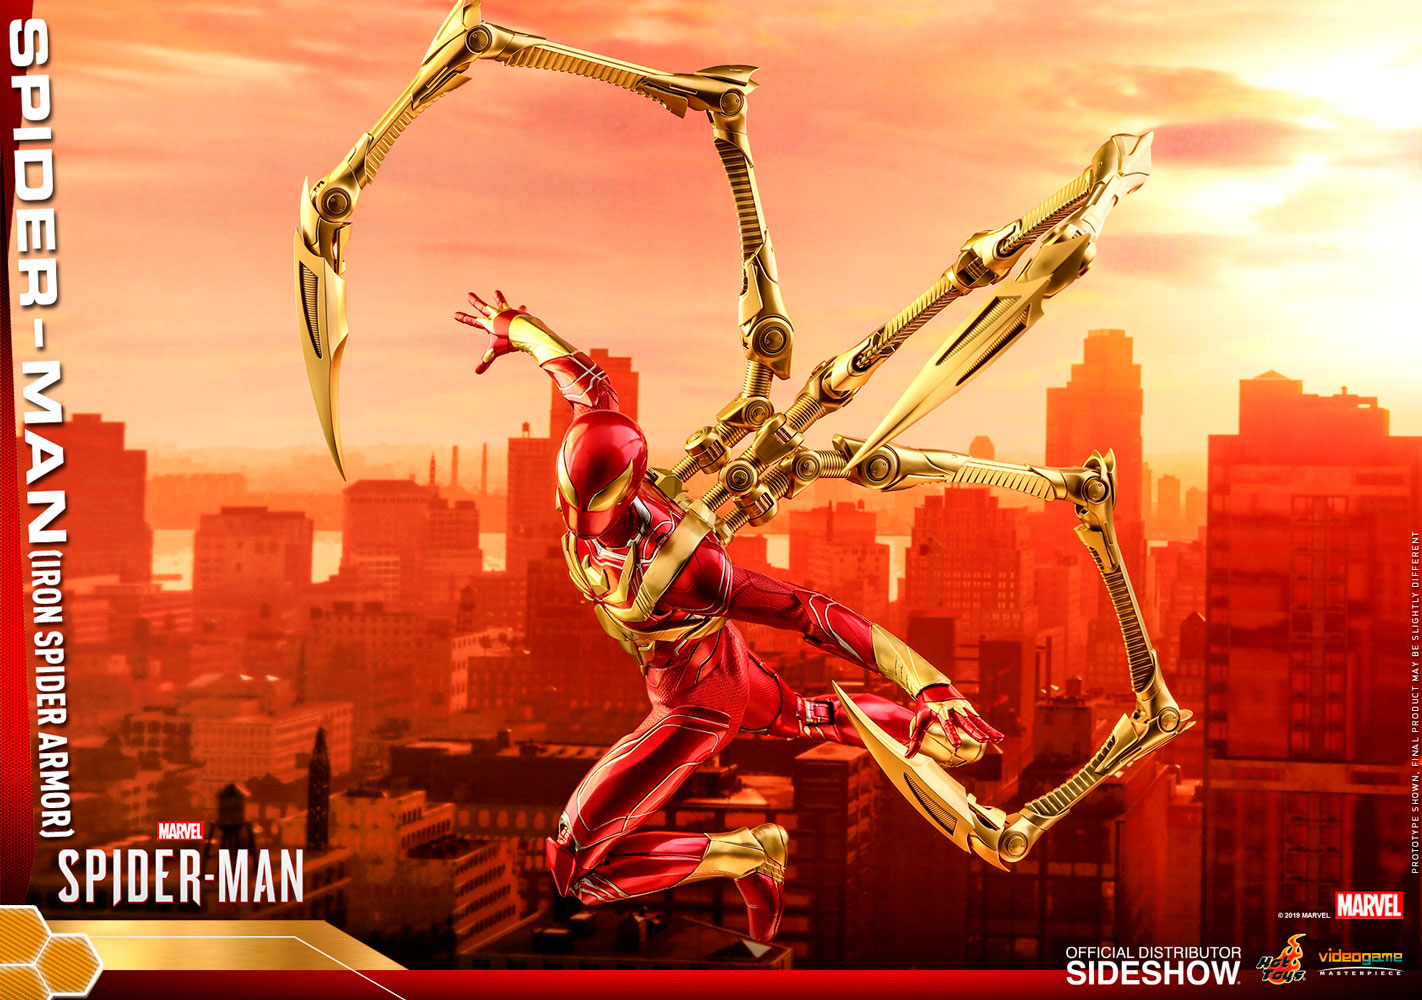 Hot Toys Marvel’s Spider-Man 1/6th Scale Collectible Figure for sale online Spider-Man Iron Spider Armor 